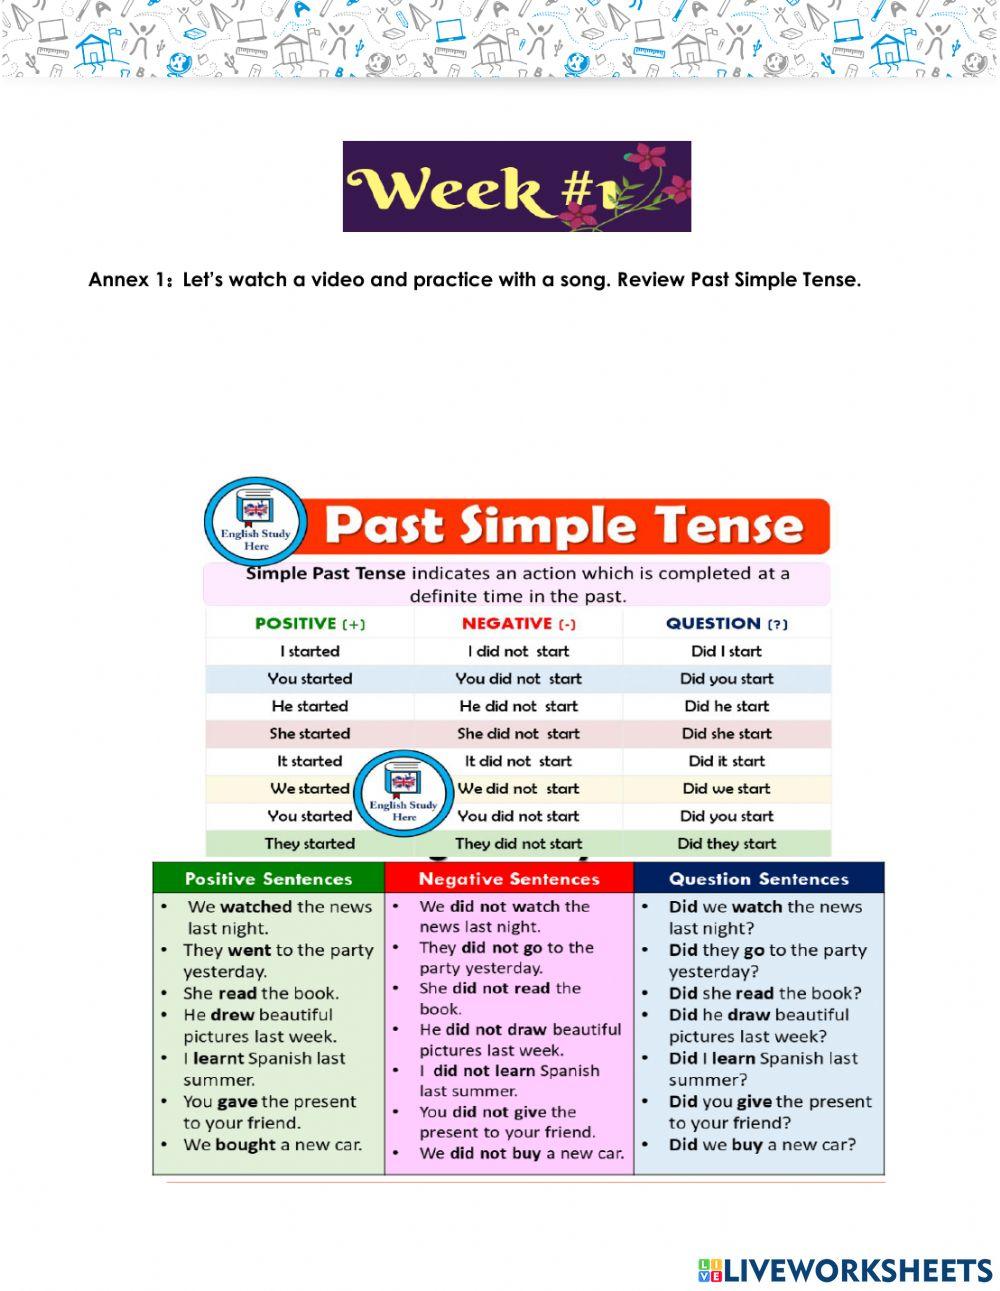 Simple past and present perfect